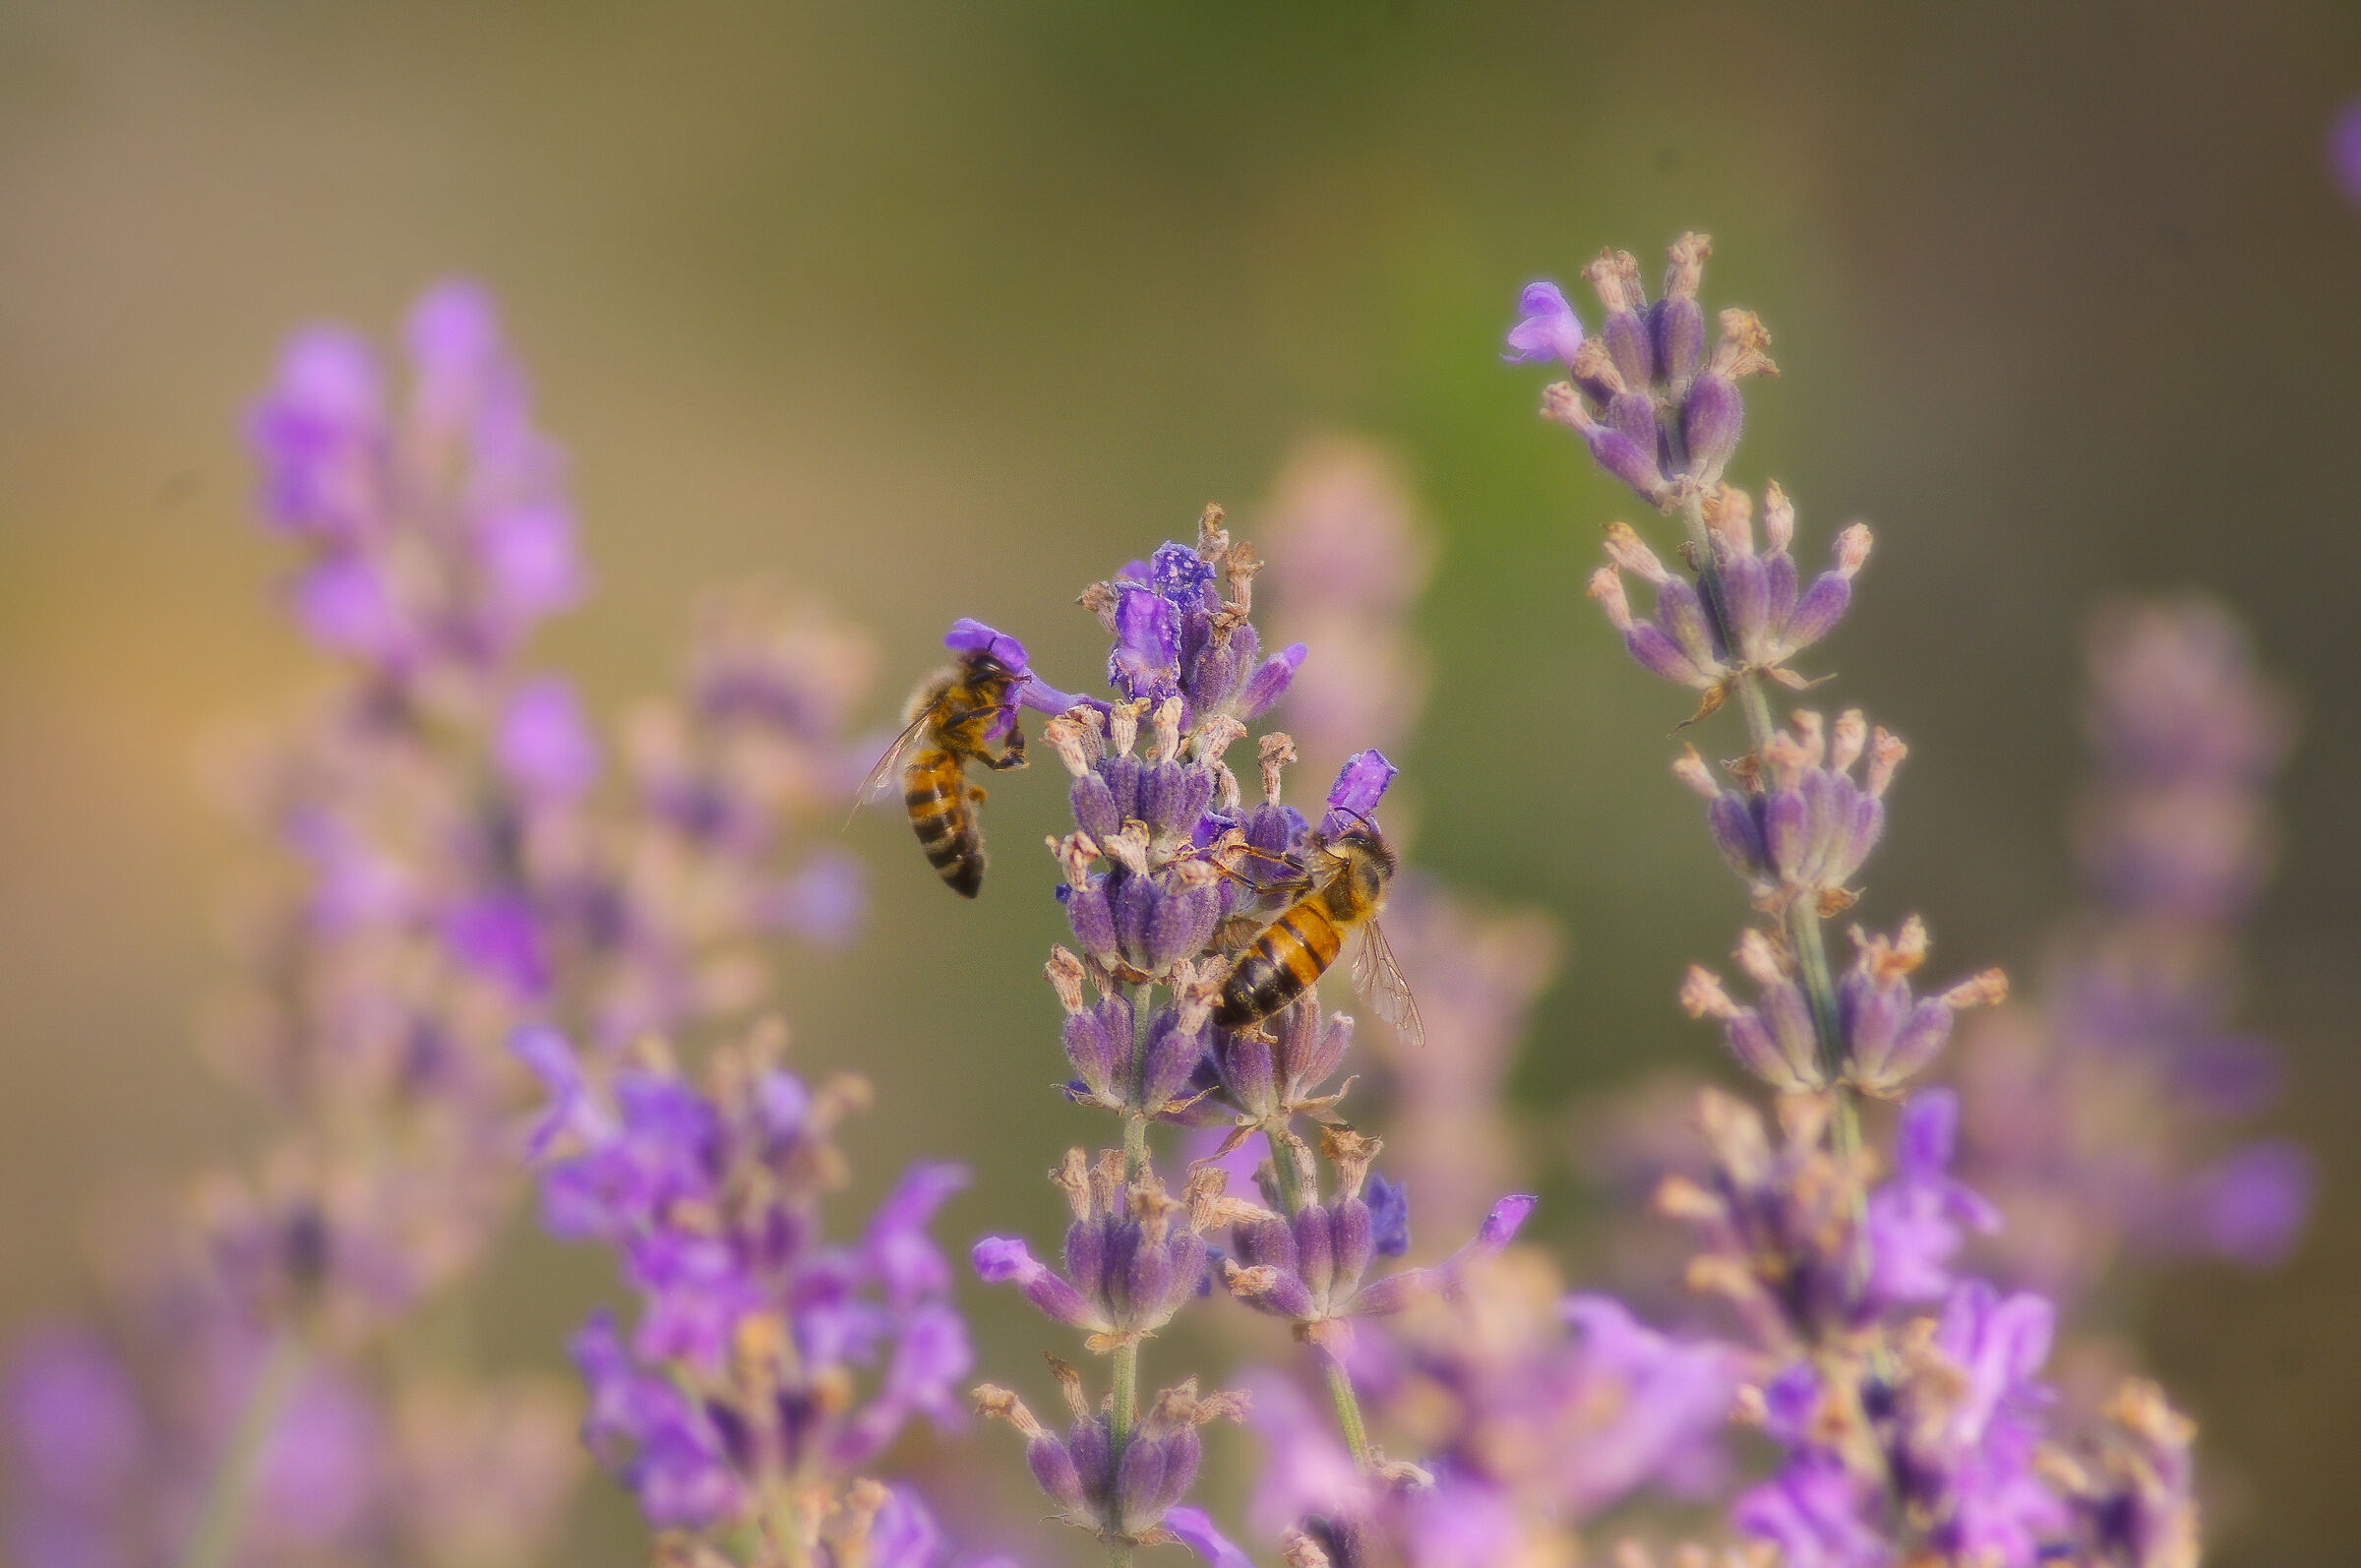 Bees and lavender flowers...